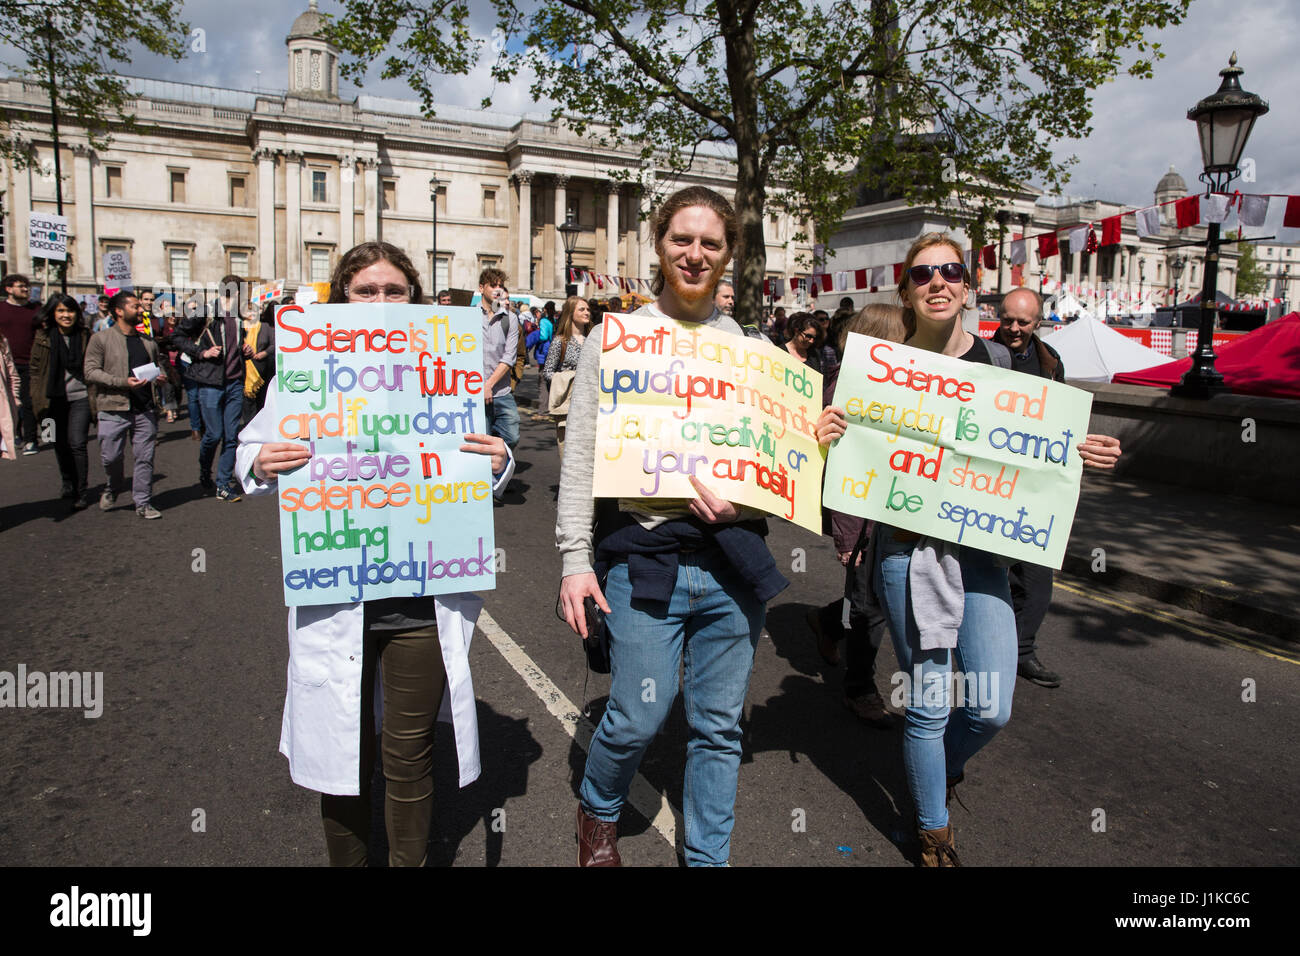 London, UK. 22nd April, 2017. Scientists march through central London on the ‘March for Science’ as part of a global protest march in the name of science. The organisers of the march, which took place on Earth Day, stated that science is ‘under attack’ from the administration of President Trump, with cuts to research funding into climate change and cancer and controversial statements by advisors such as Scott Pruitt, head of the US Environmental Protection Agency, who denied that carbon dioxide emissions are a primary cause of global warming. Stock Photo